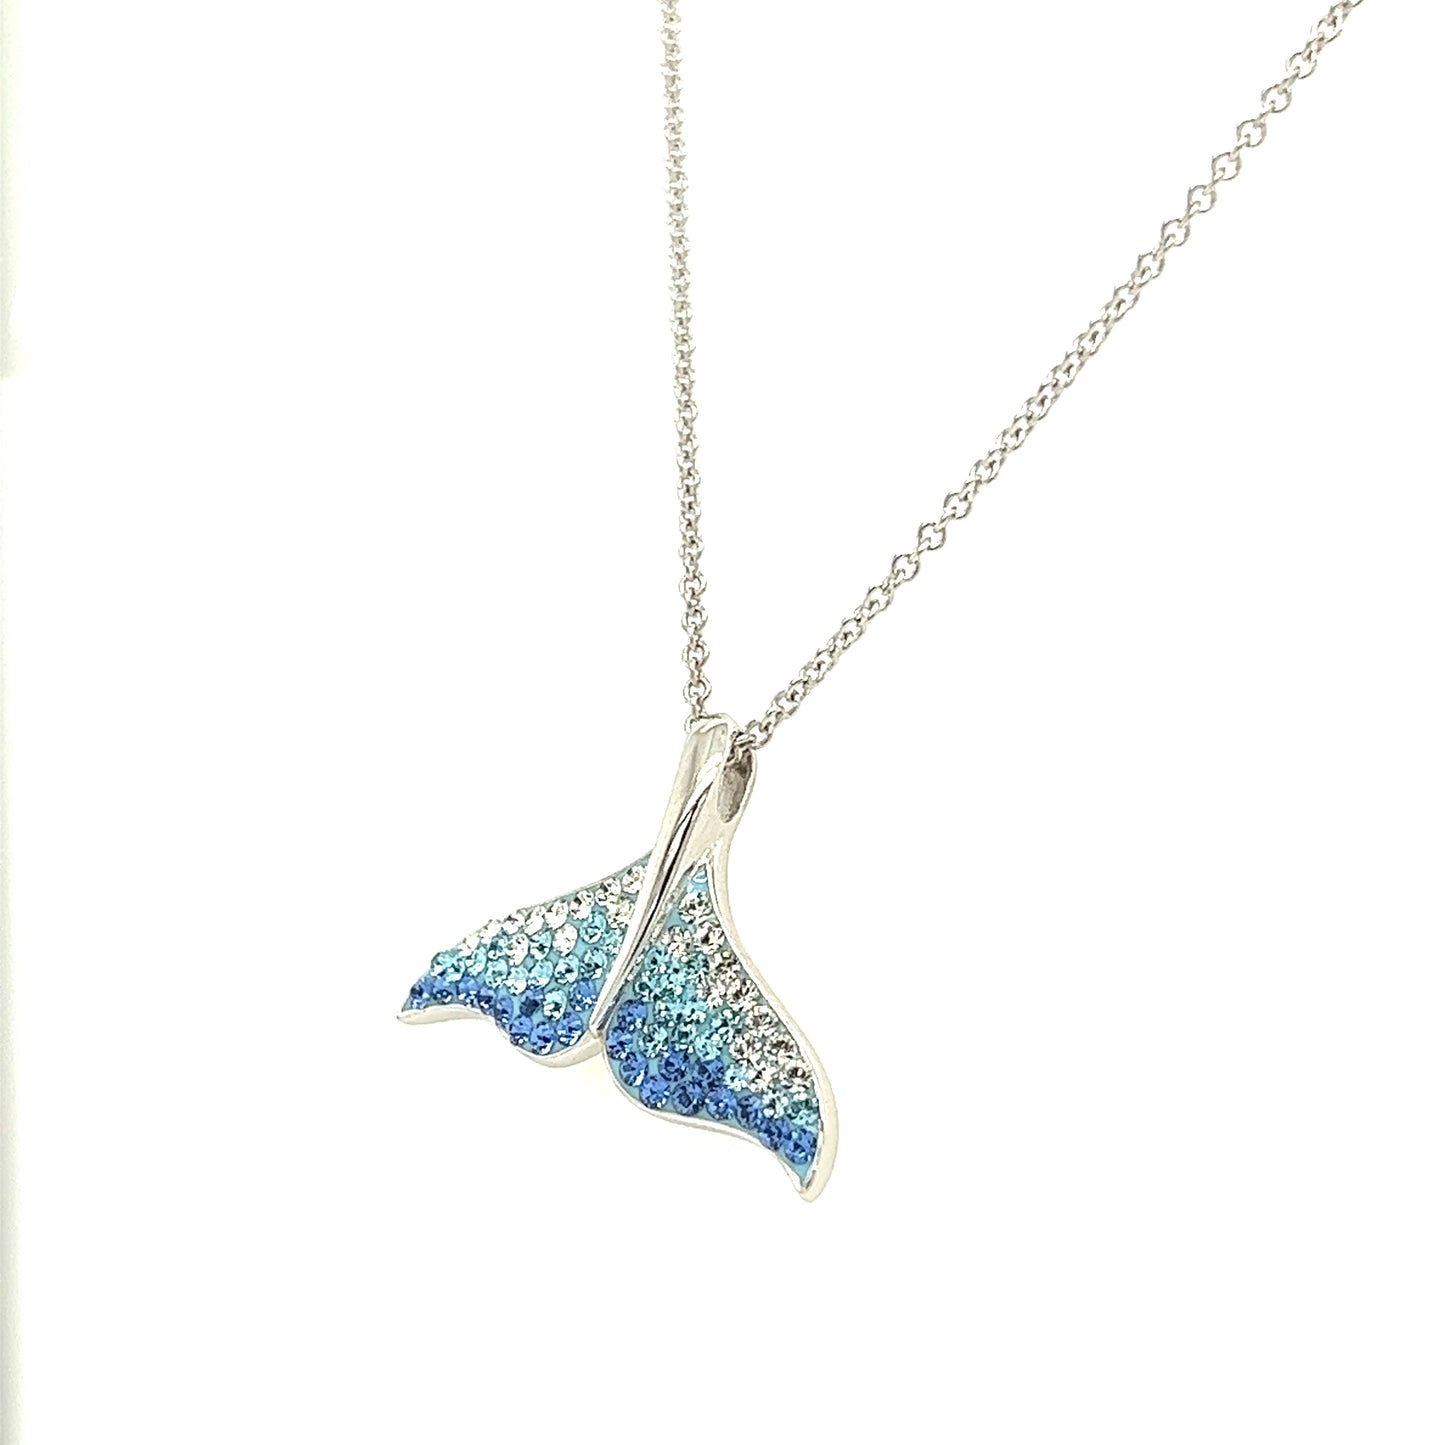 Whale Tail Necklace with White, Aqua and Blue Crystals in Sterling Silver Right Side View